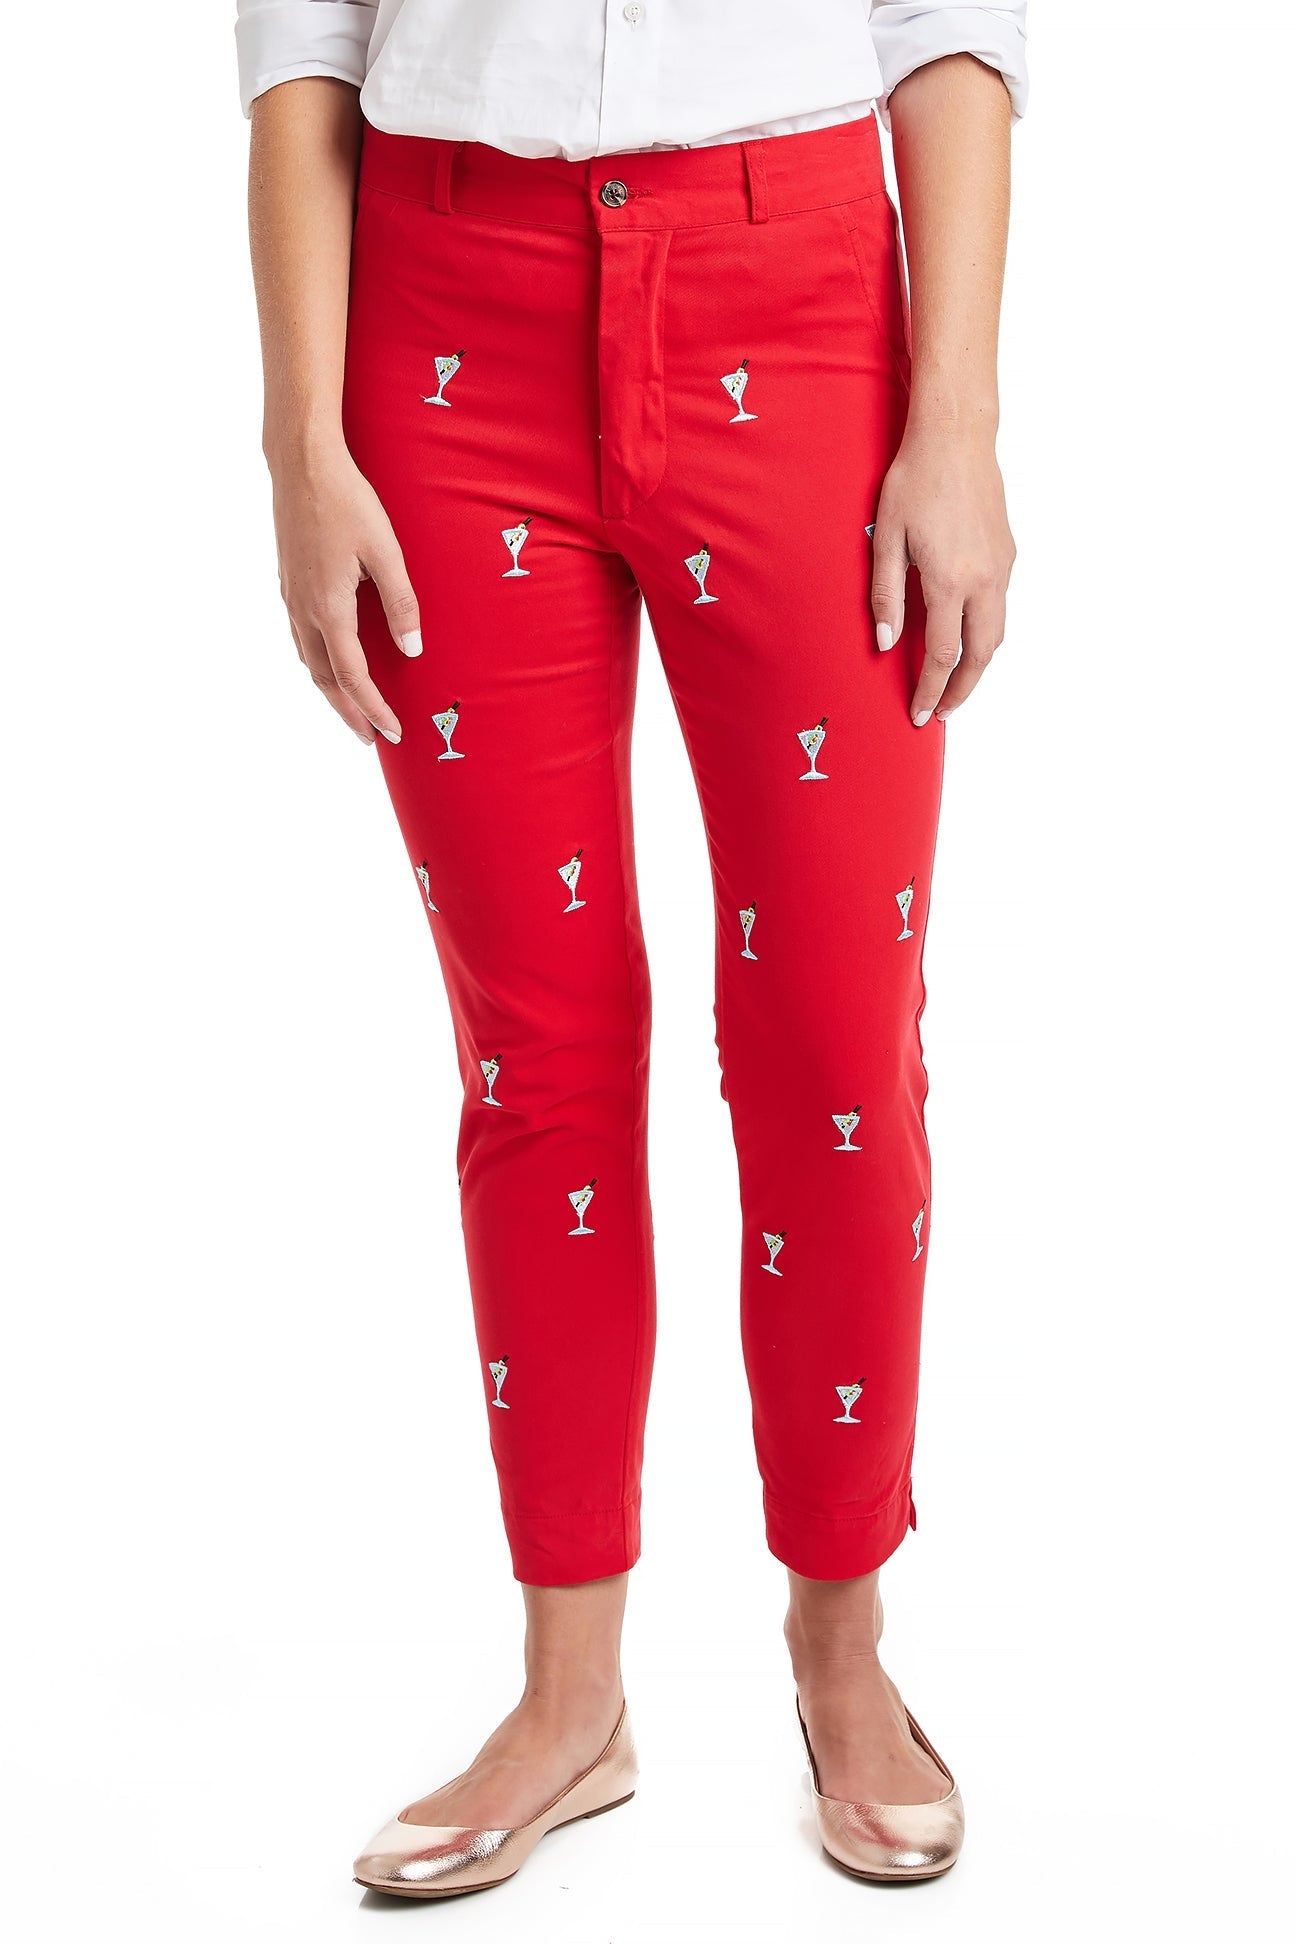 Ladies Ankle Holiday Capri Red with Martini – Castaway Nantucket Island